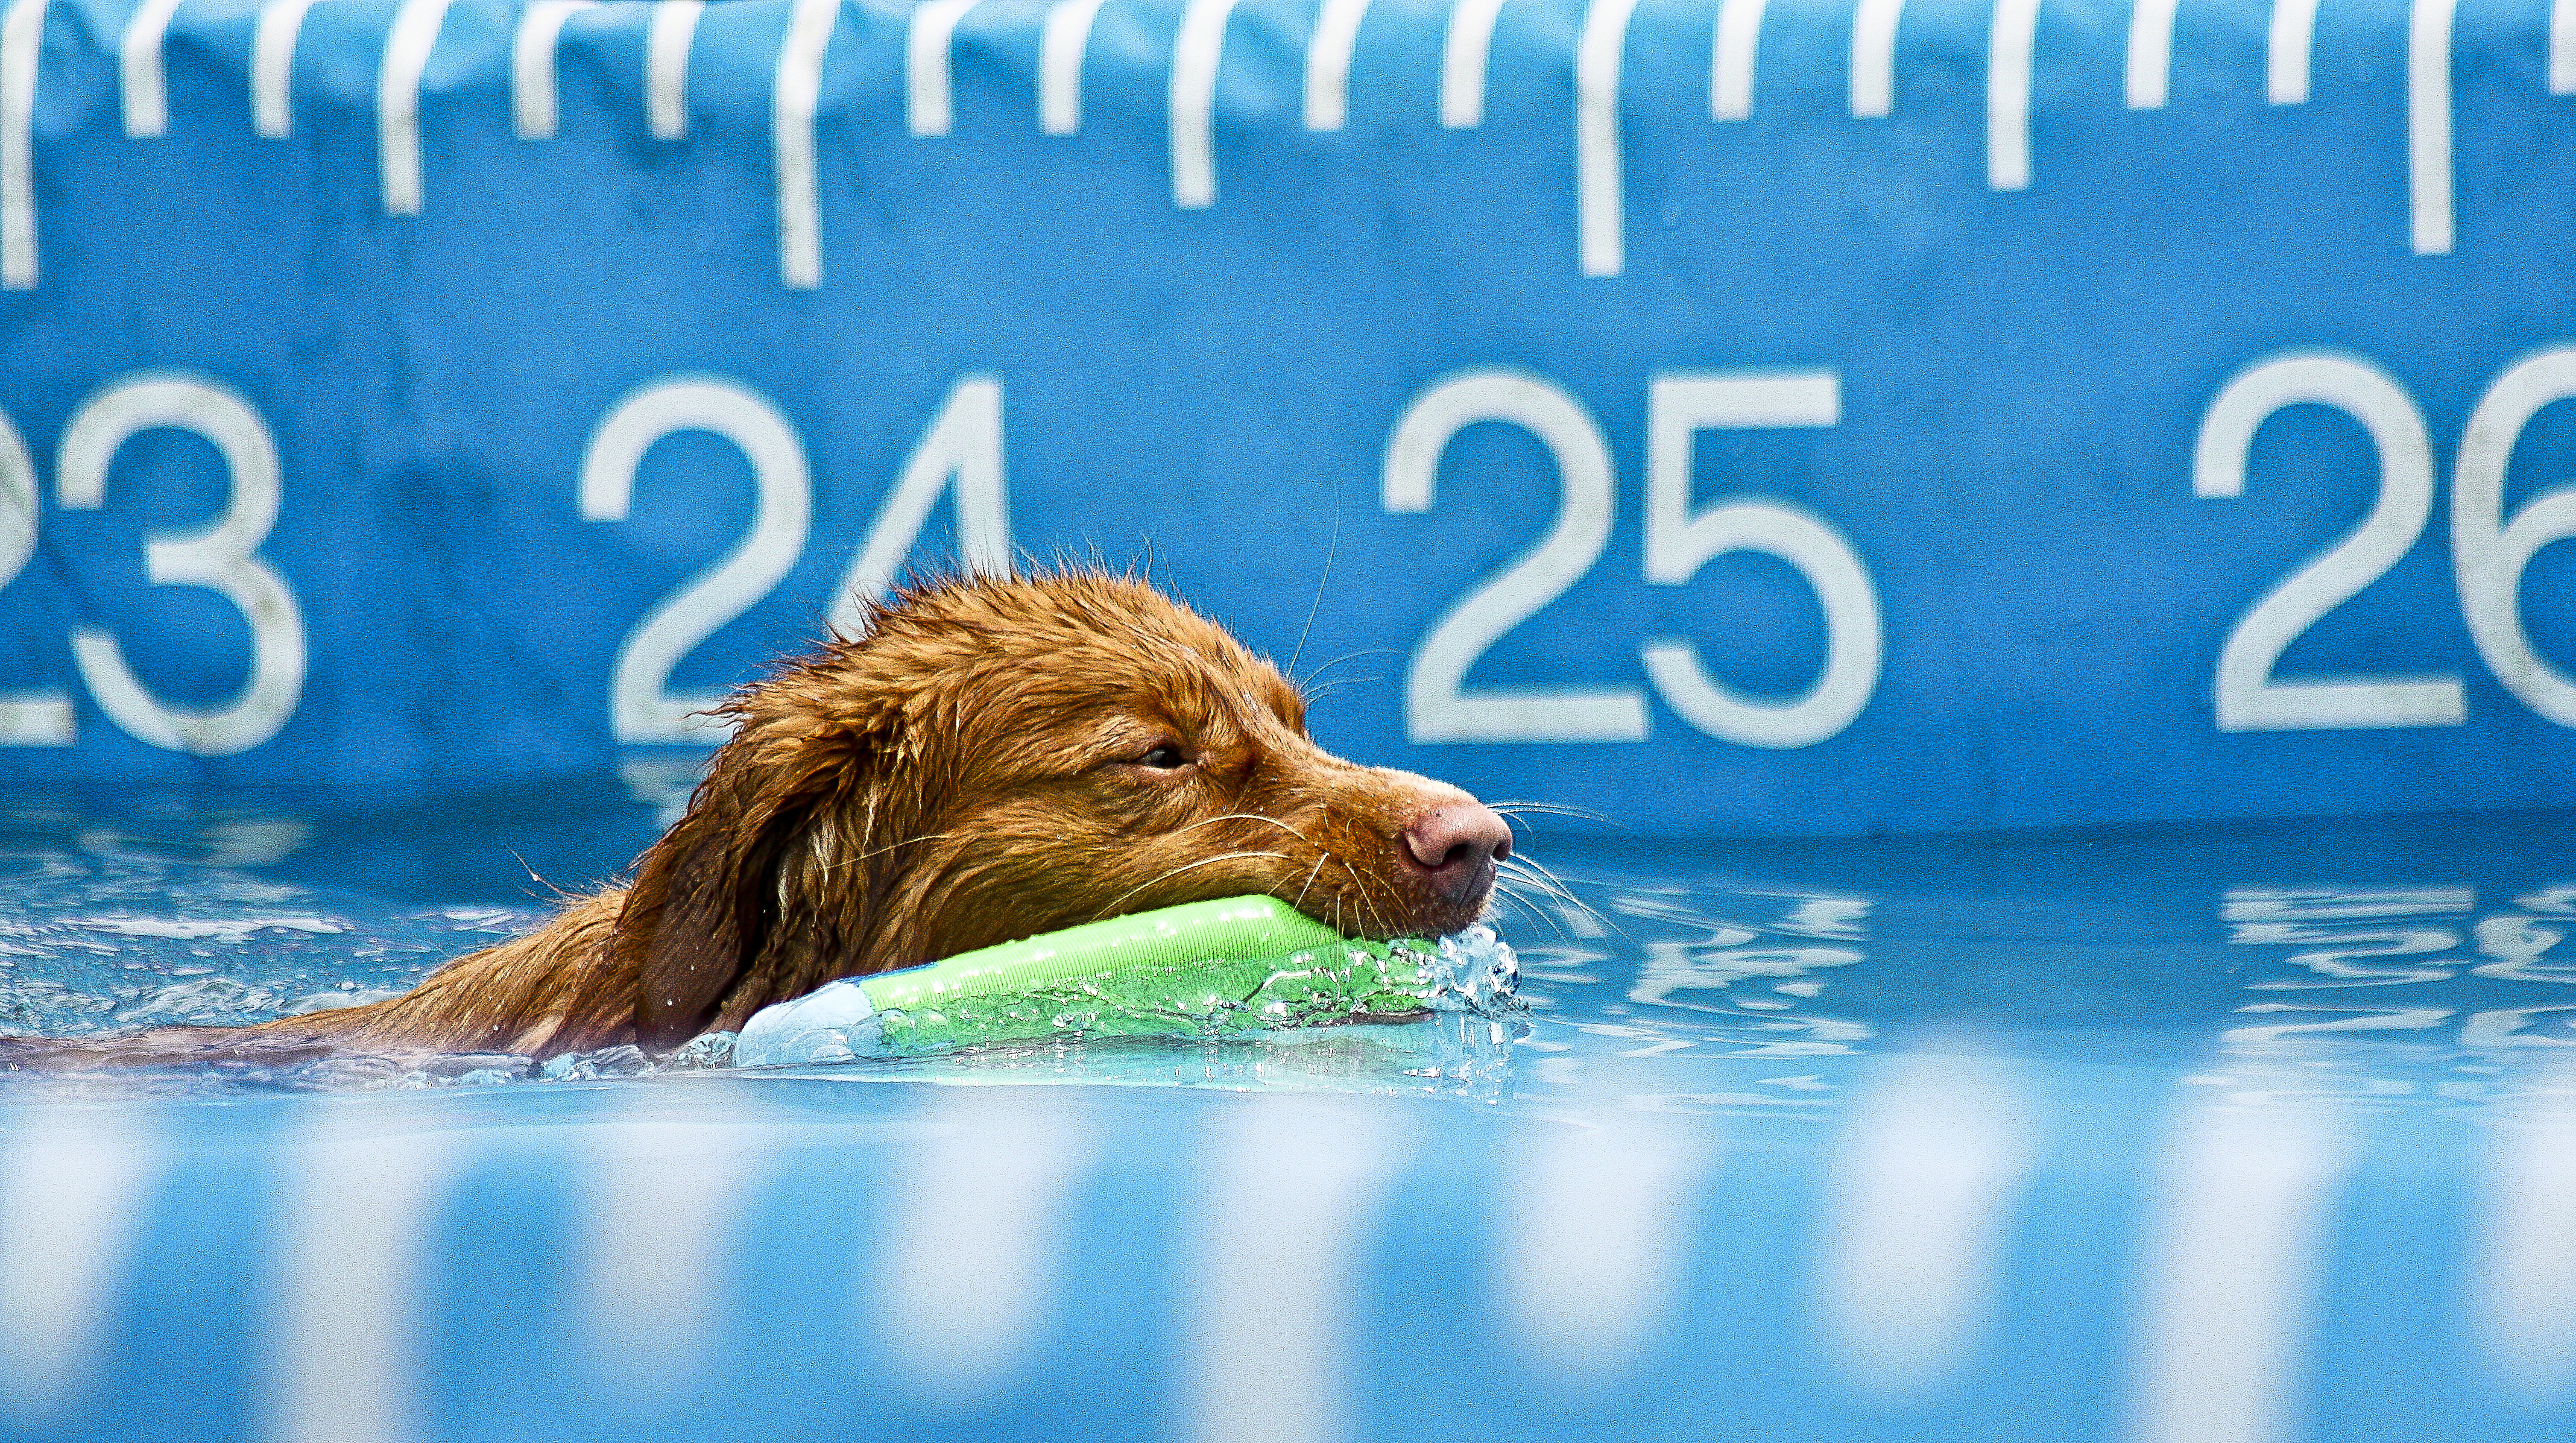 The Competiition, Action, Distance, Dog, Swim, HQ Photo